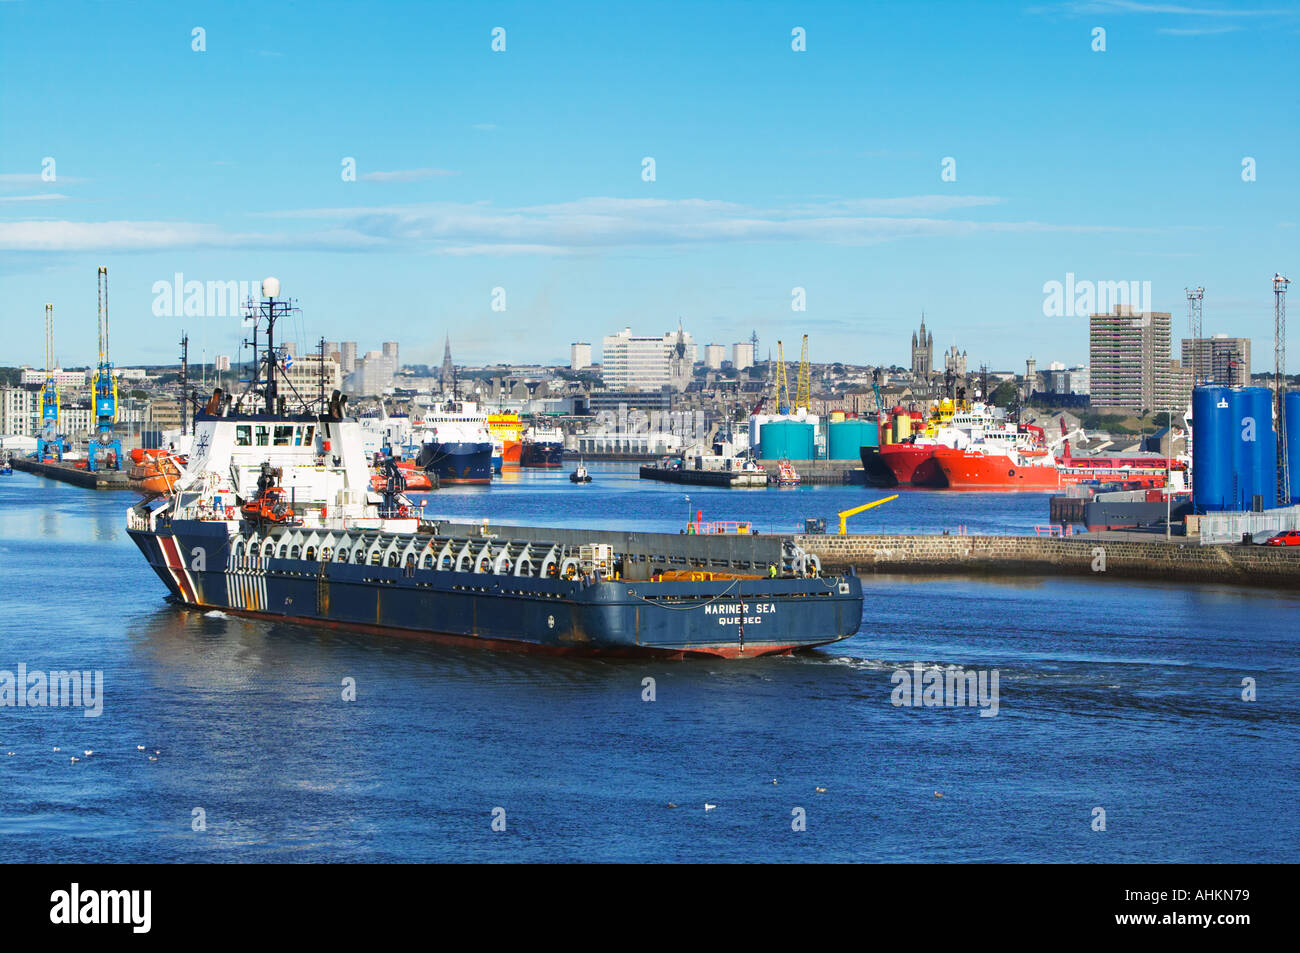 Aberdeen Harbour, Aberdeen, Scotland.  Supply boat entering the harbour. Stock Photo